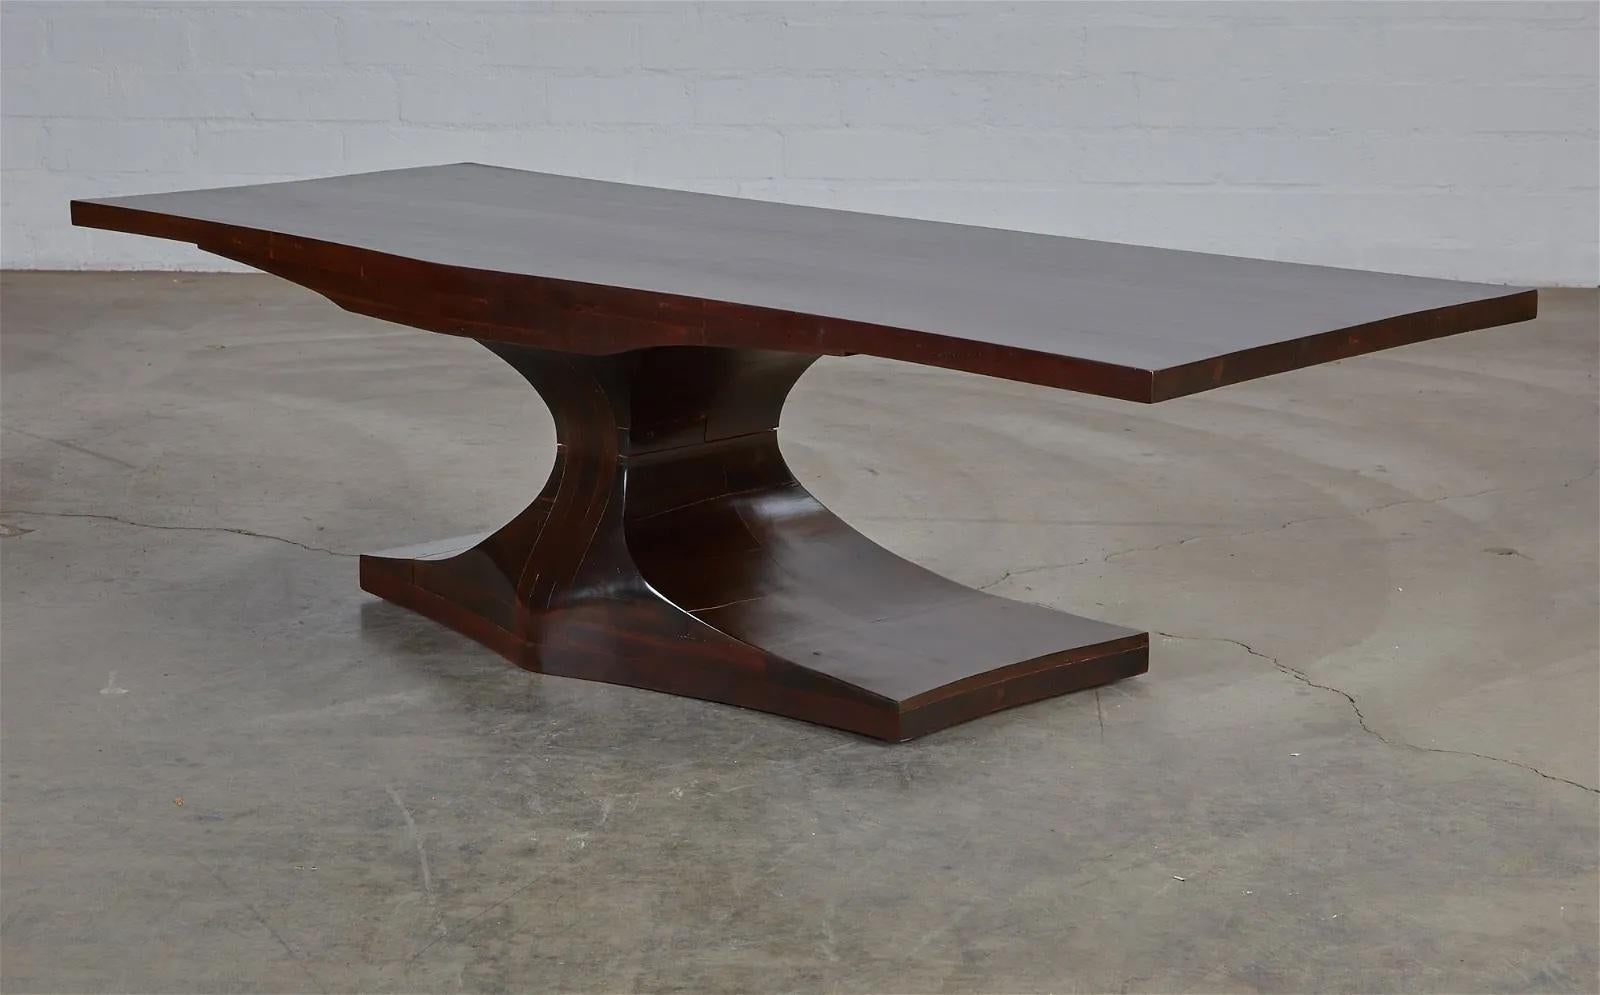 Modernist Mid 20th Century Sculptured Hardwood Coffee Table In Good Condition For Sale In Los Angeles, CA